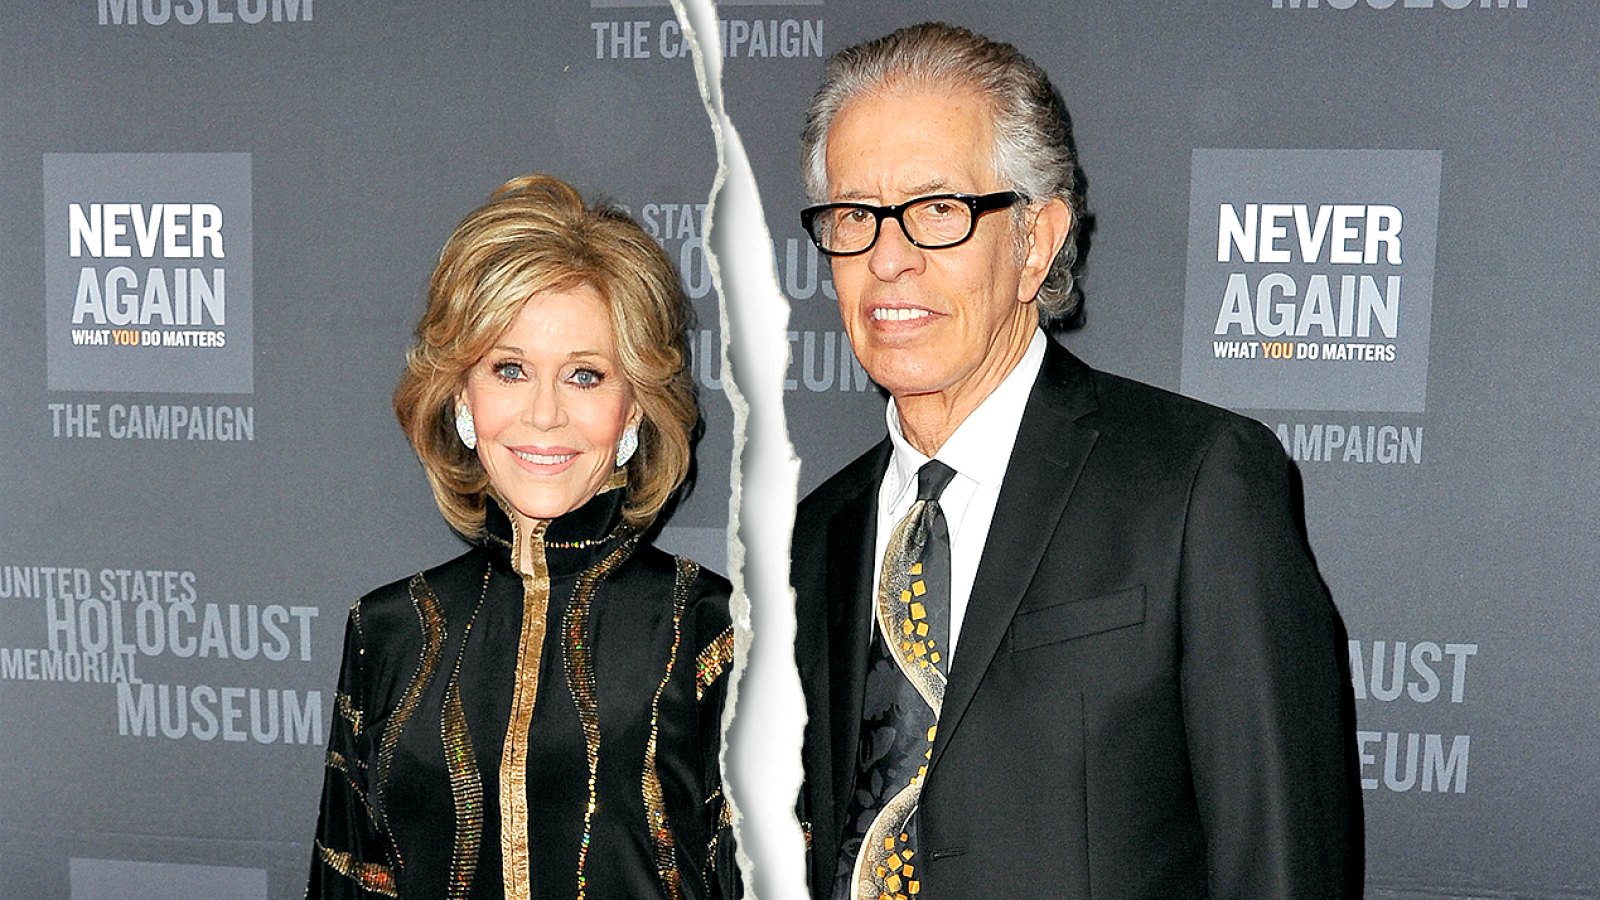 Jane Fonda and Richard Perry attend the 2016 Los Angeles Dinner: What You Do Matters presented by the United States Holocaust Memorial Museum at The Beverly Hilton Hotel on March 2, 2016 in Beverly Hills, California.